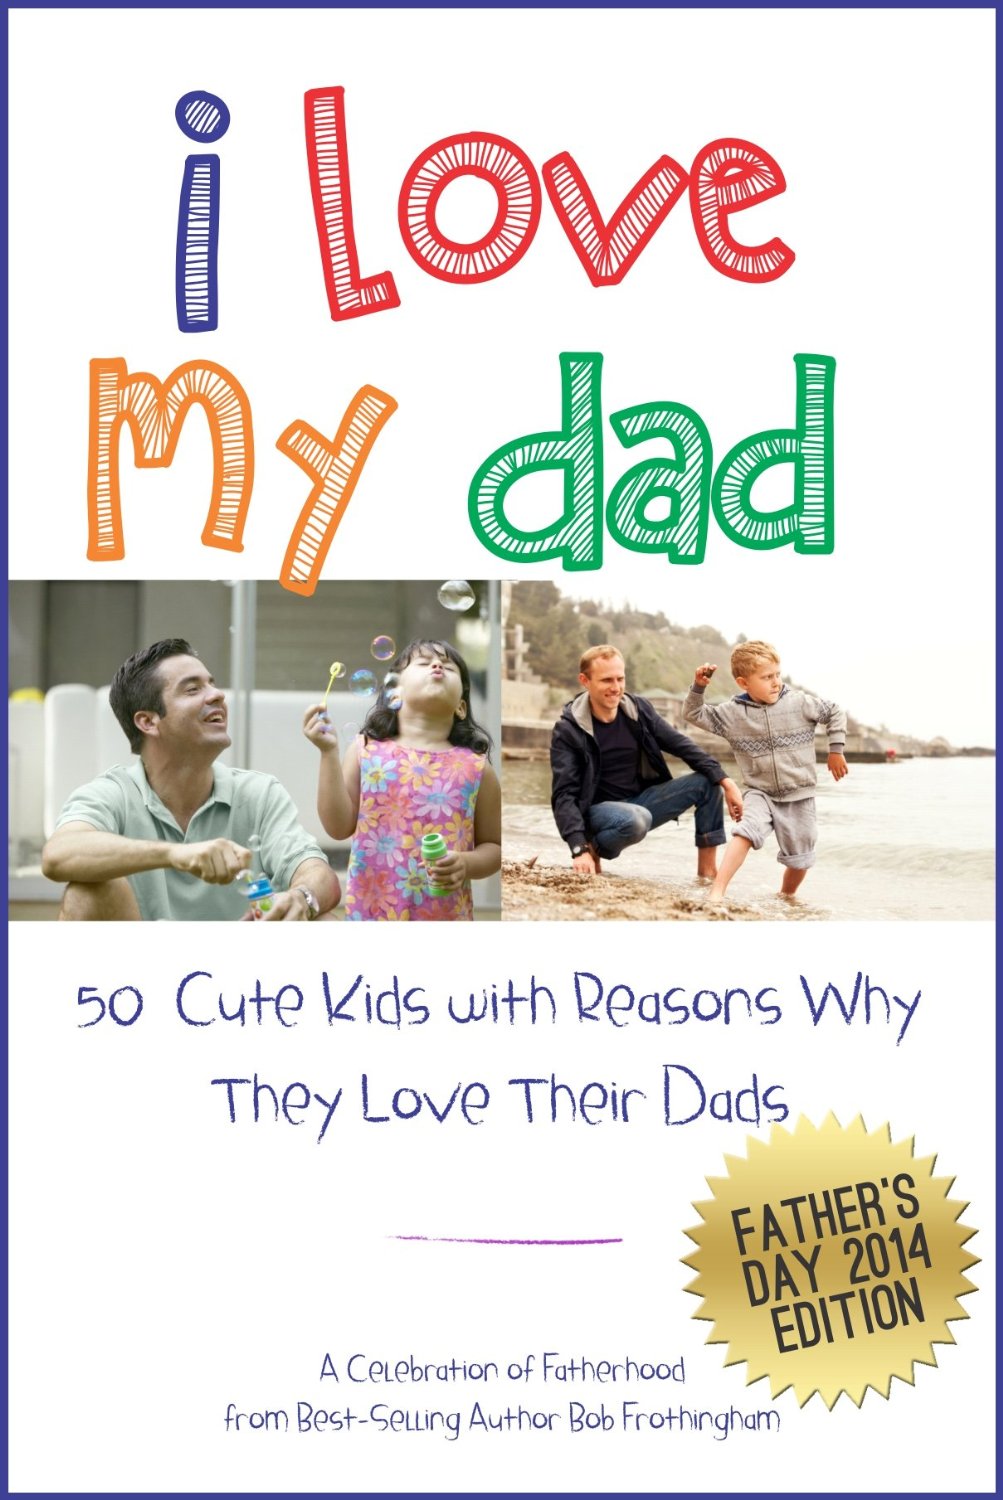 I Love My Dad – 50 Cute Kids with Reasons Why the Lover Their Dads by Bob Frothingham